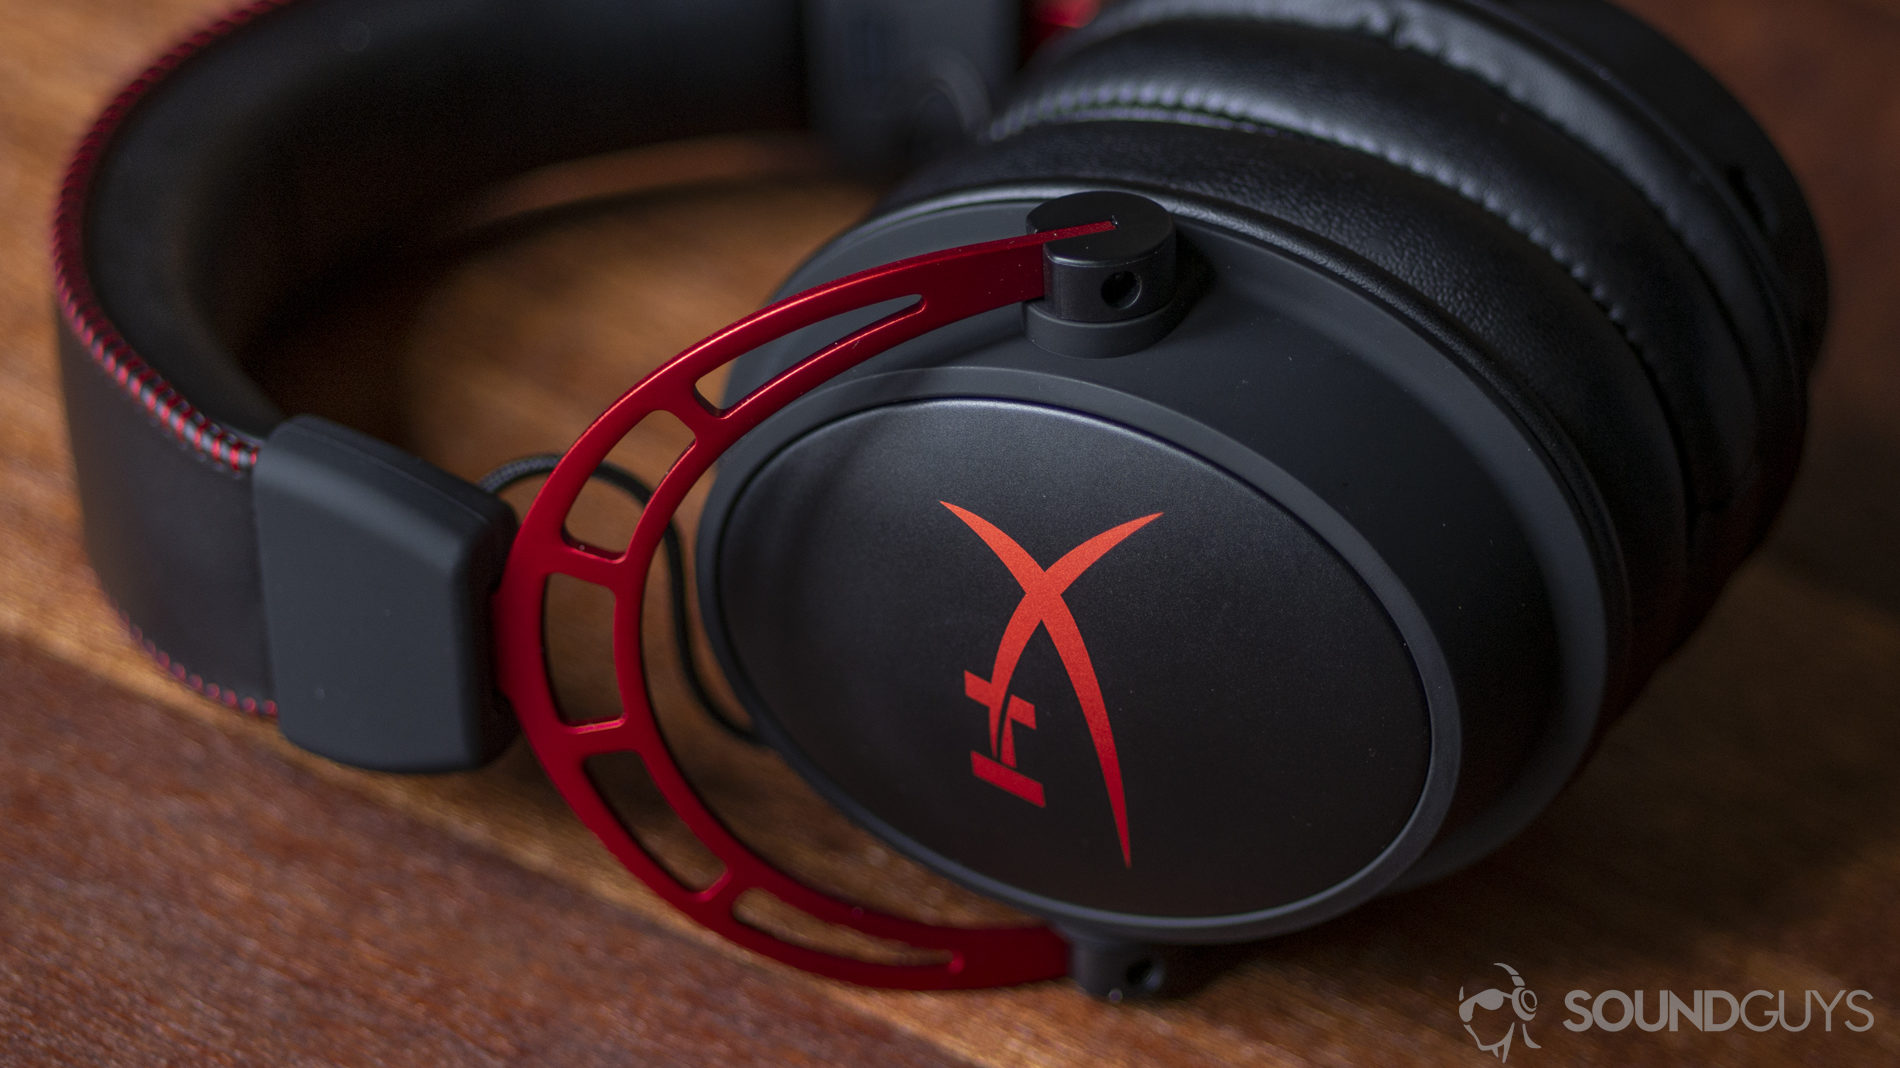 A picture of the HyperX Cloud Alpha gaming headset on a wooden table.